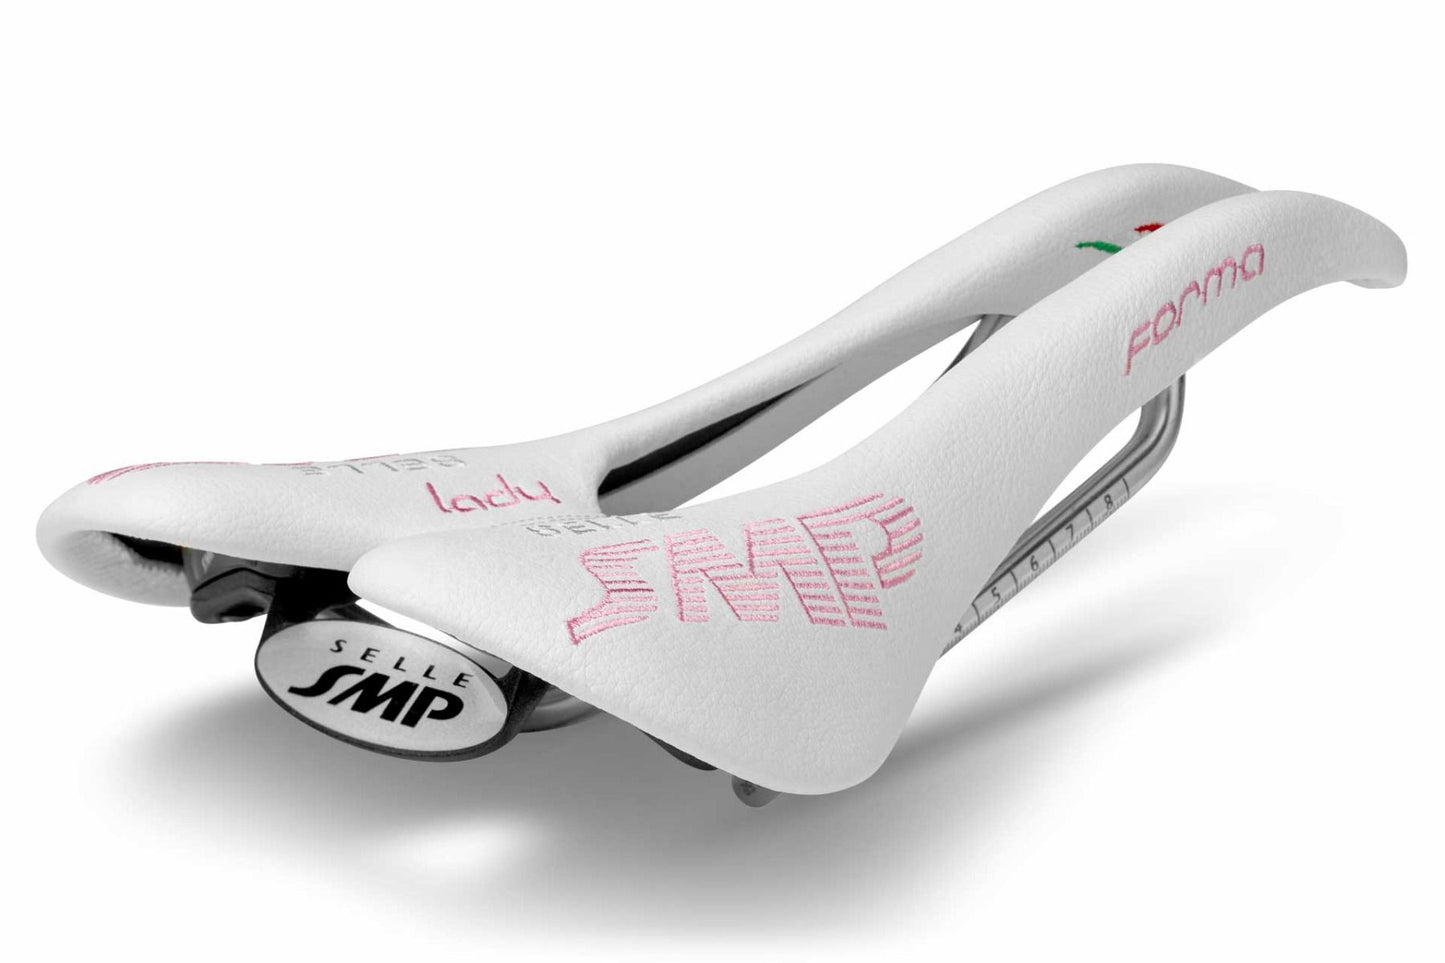 Selle SMP Forma Saddle with Steel Rails (Lady White)